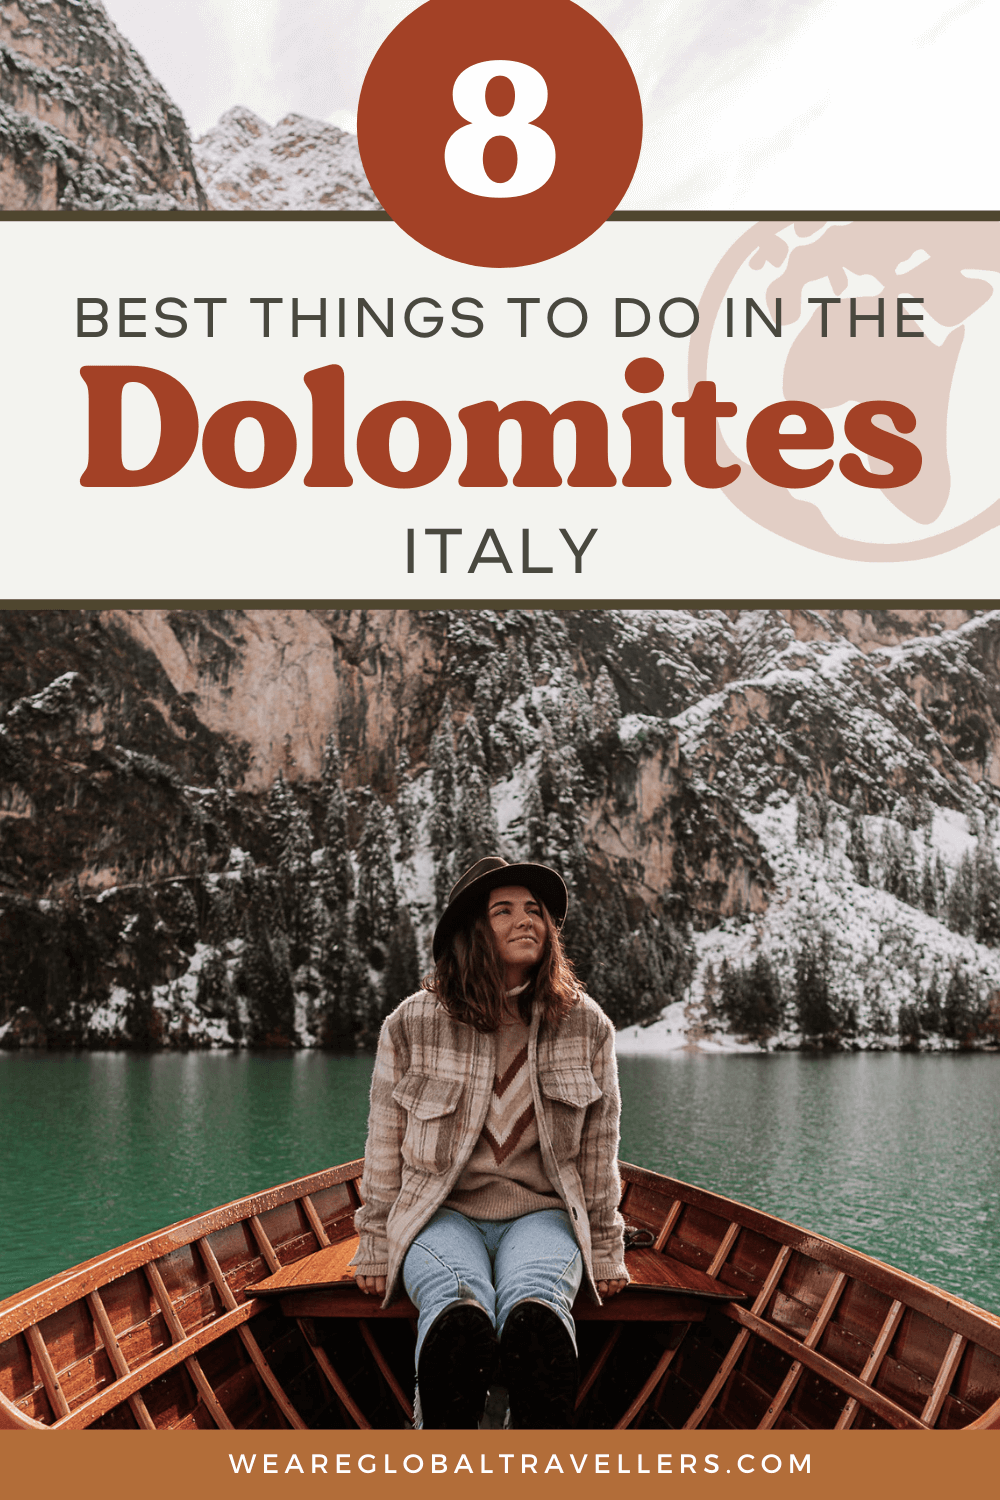 The best things to do in the Dolomites, Italy